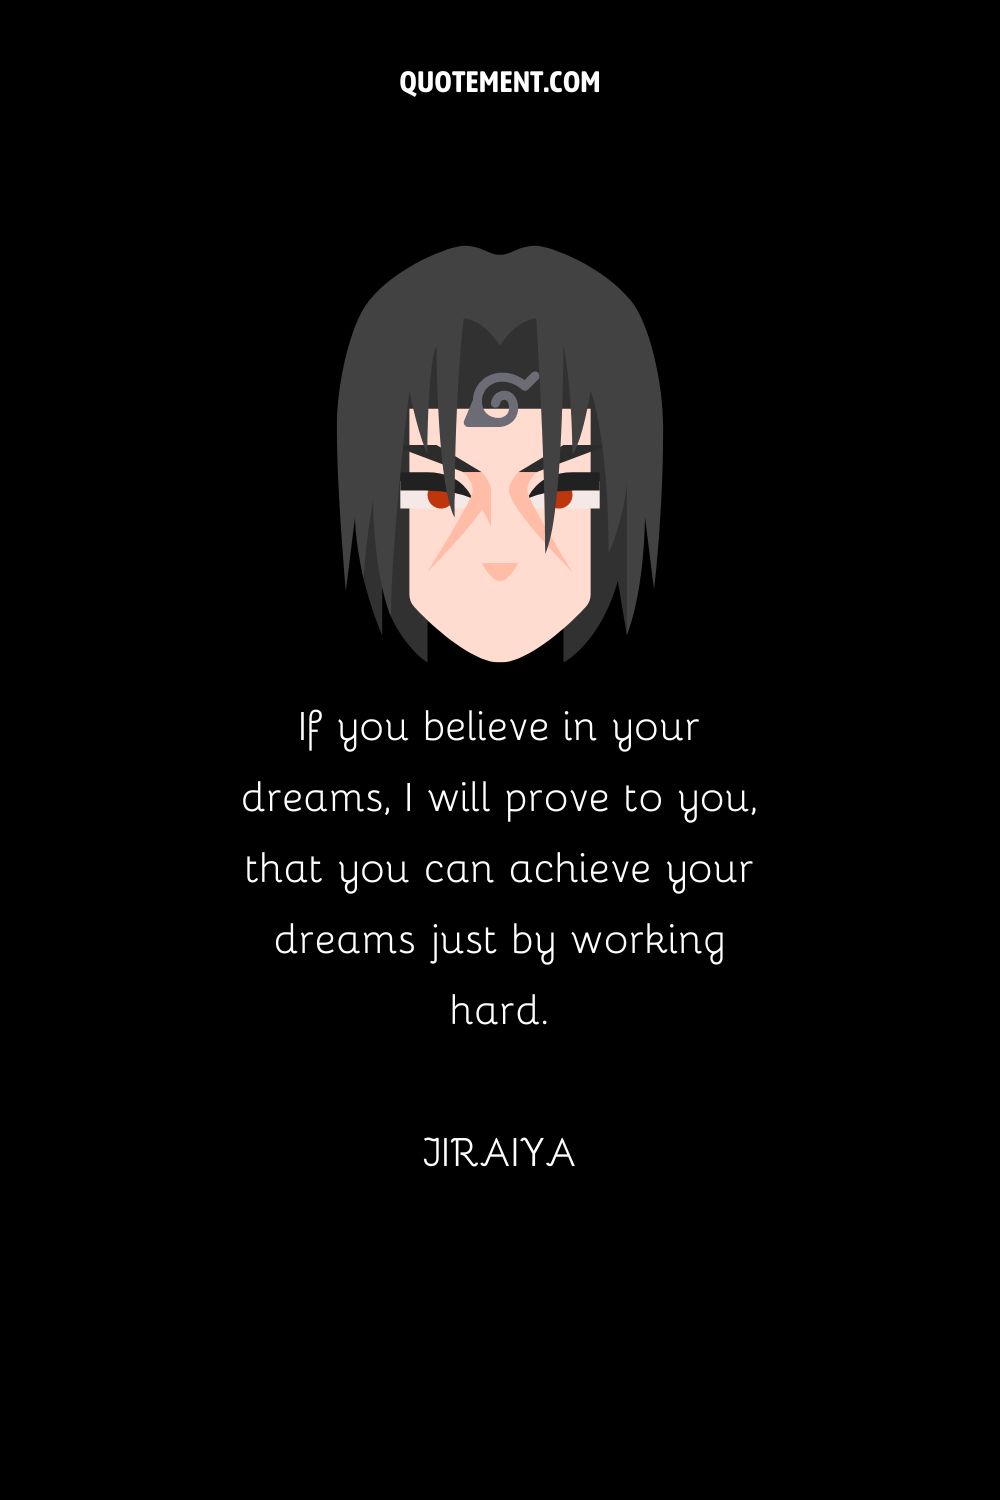 “If you believe in your dreams, I will prove to you, that you can achieve your dreams just by working hard.” — Rock Lee